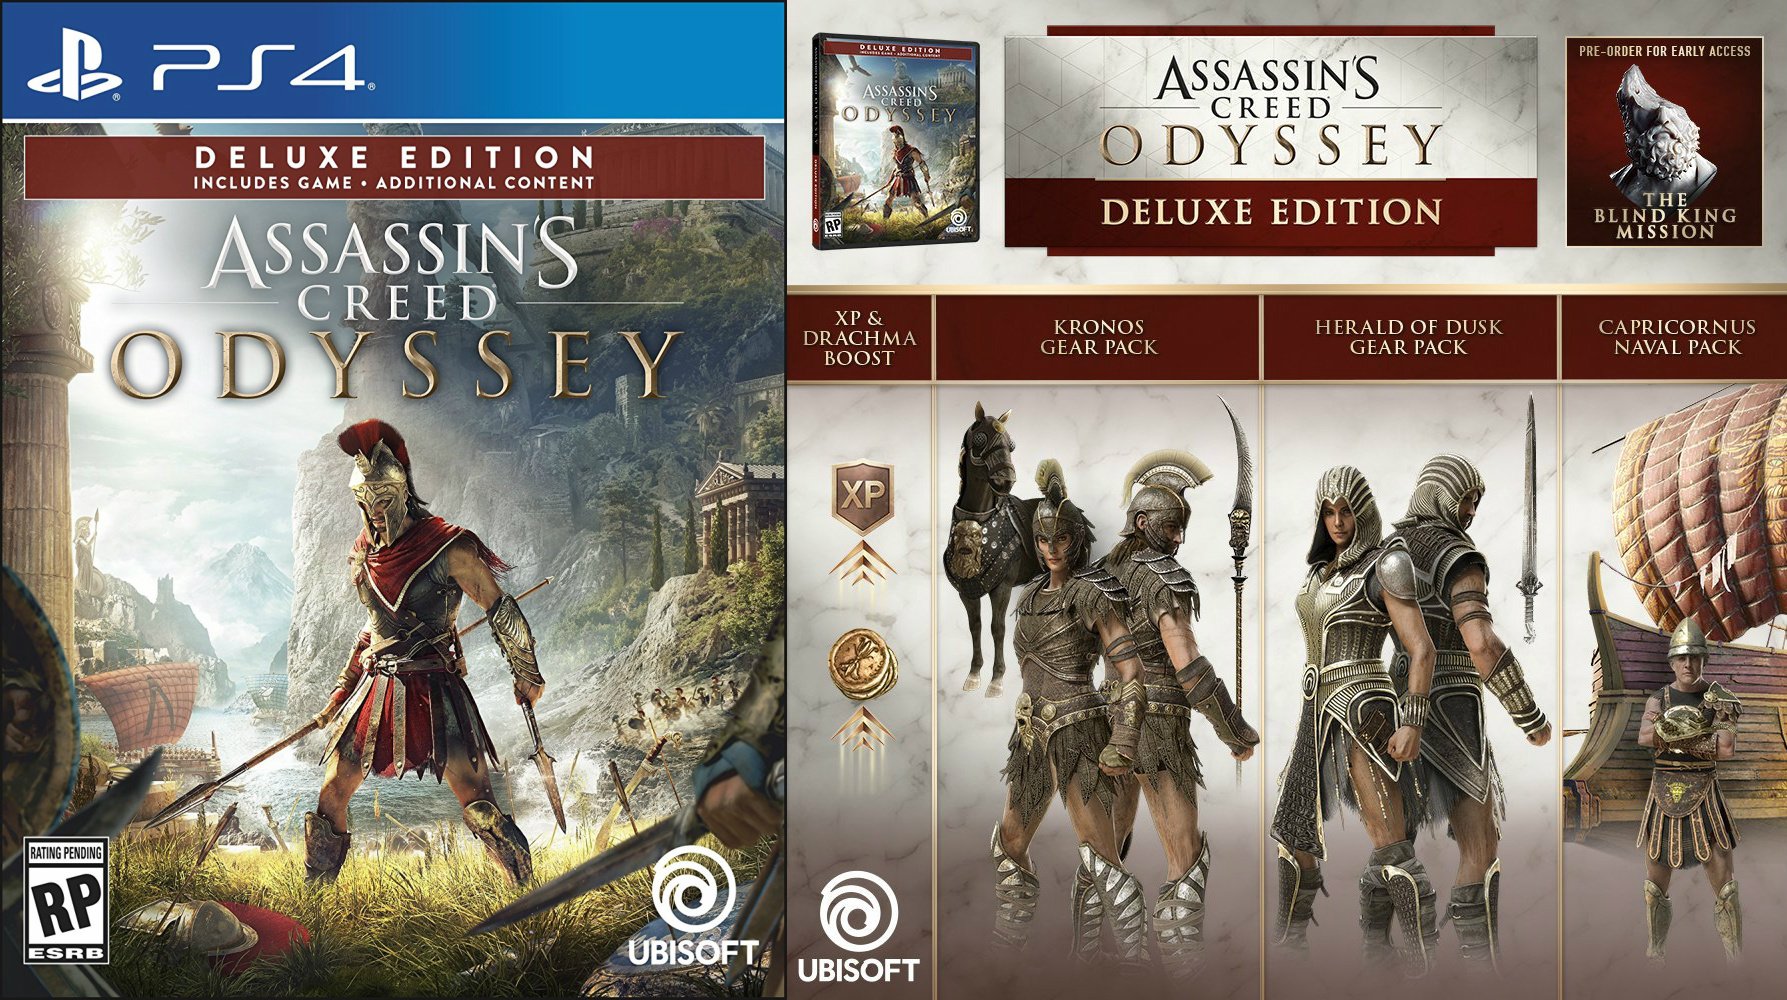 Assassin s creed odyssey editions. Assassin's Creed Odyssey Deluxe Edition ps4. Assassins Creed Одиссея Deluxe. Assassin's Creed Odyssey Gold Edition ps4. Assassin's Creed: Odyssey - Ultimate Edition.